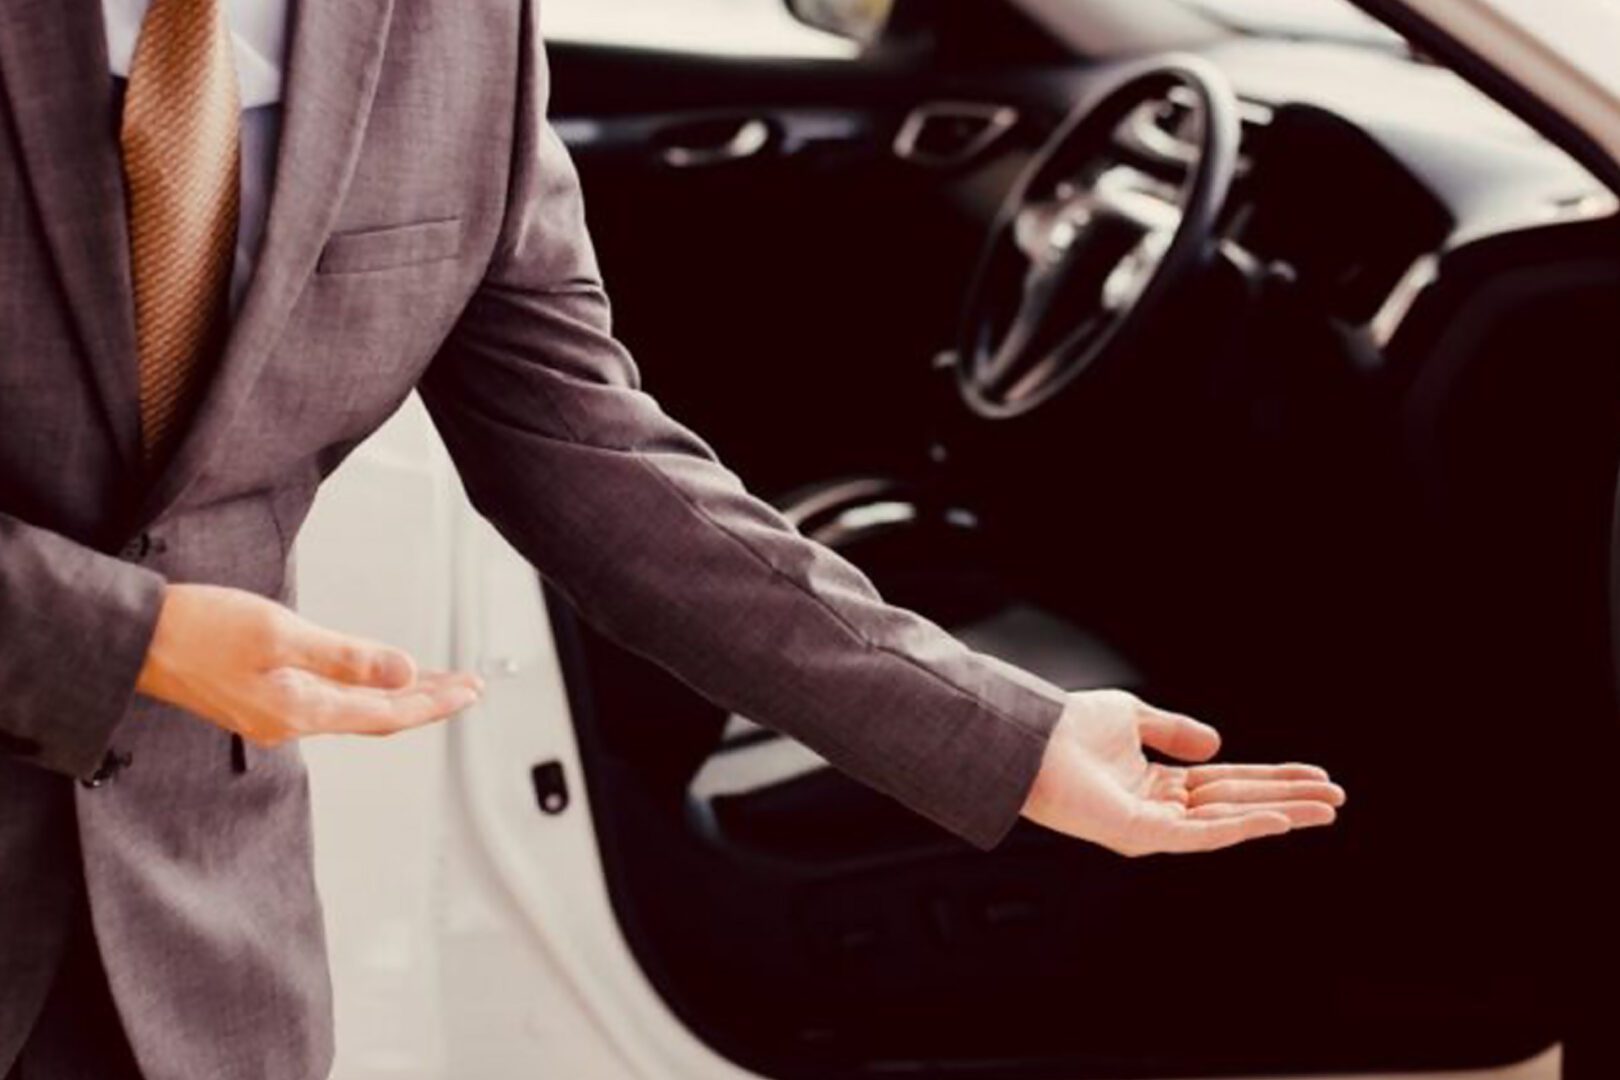 A man in a suit is reaching out of the car